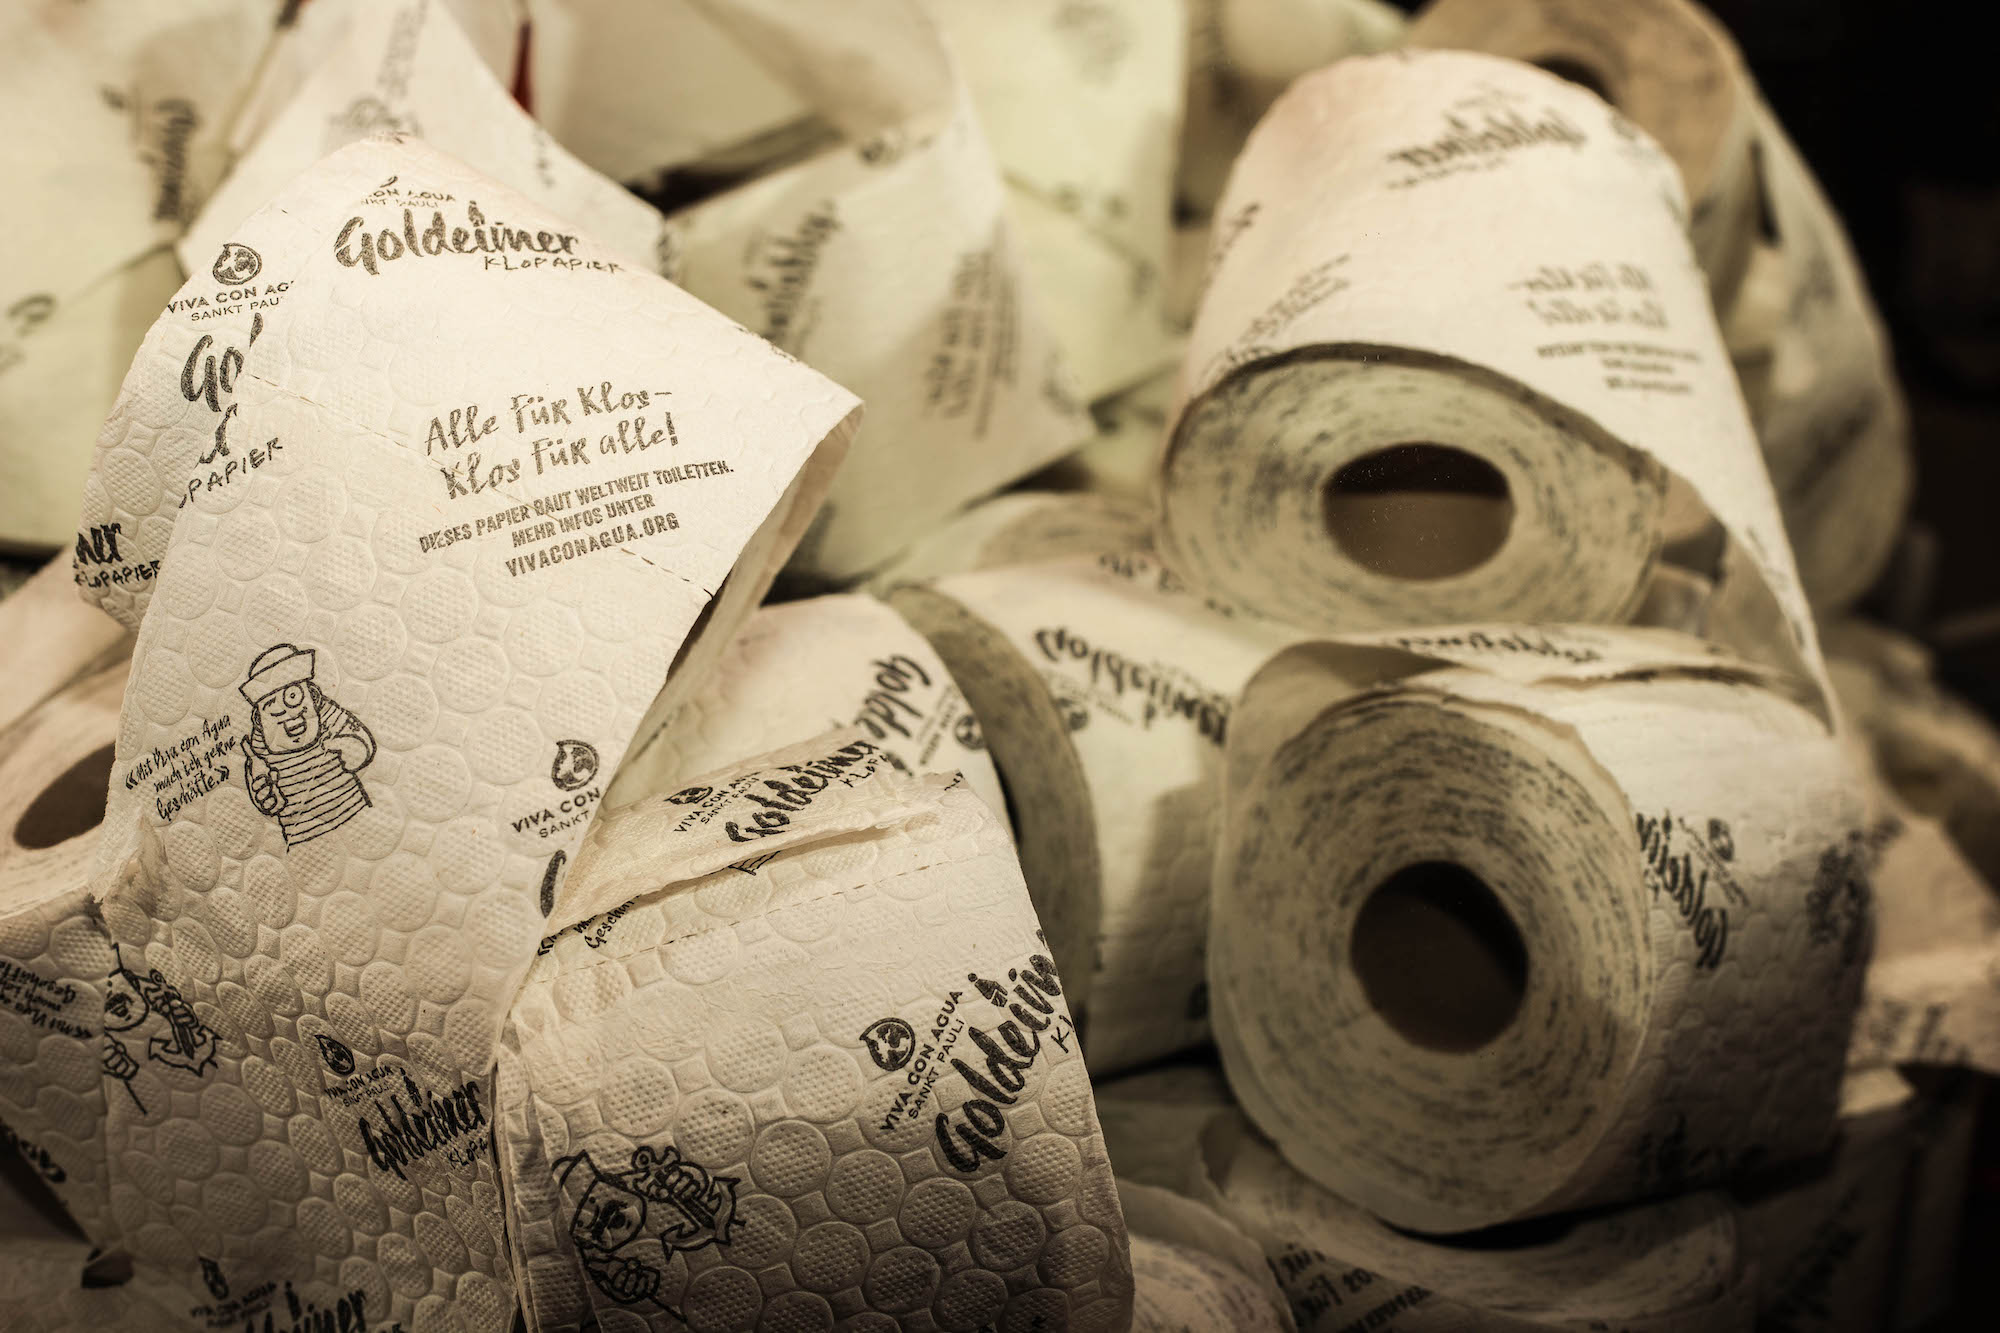 100% recycled and recyclable toilet paper